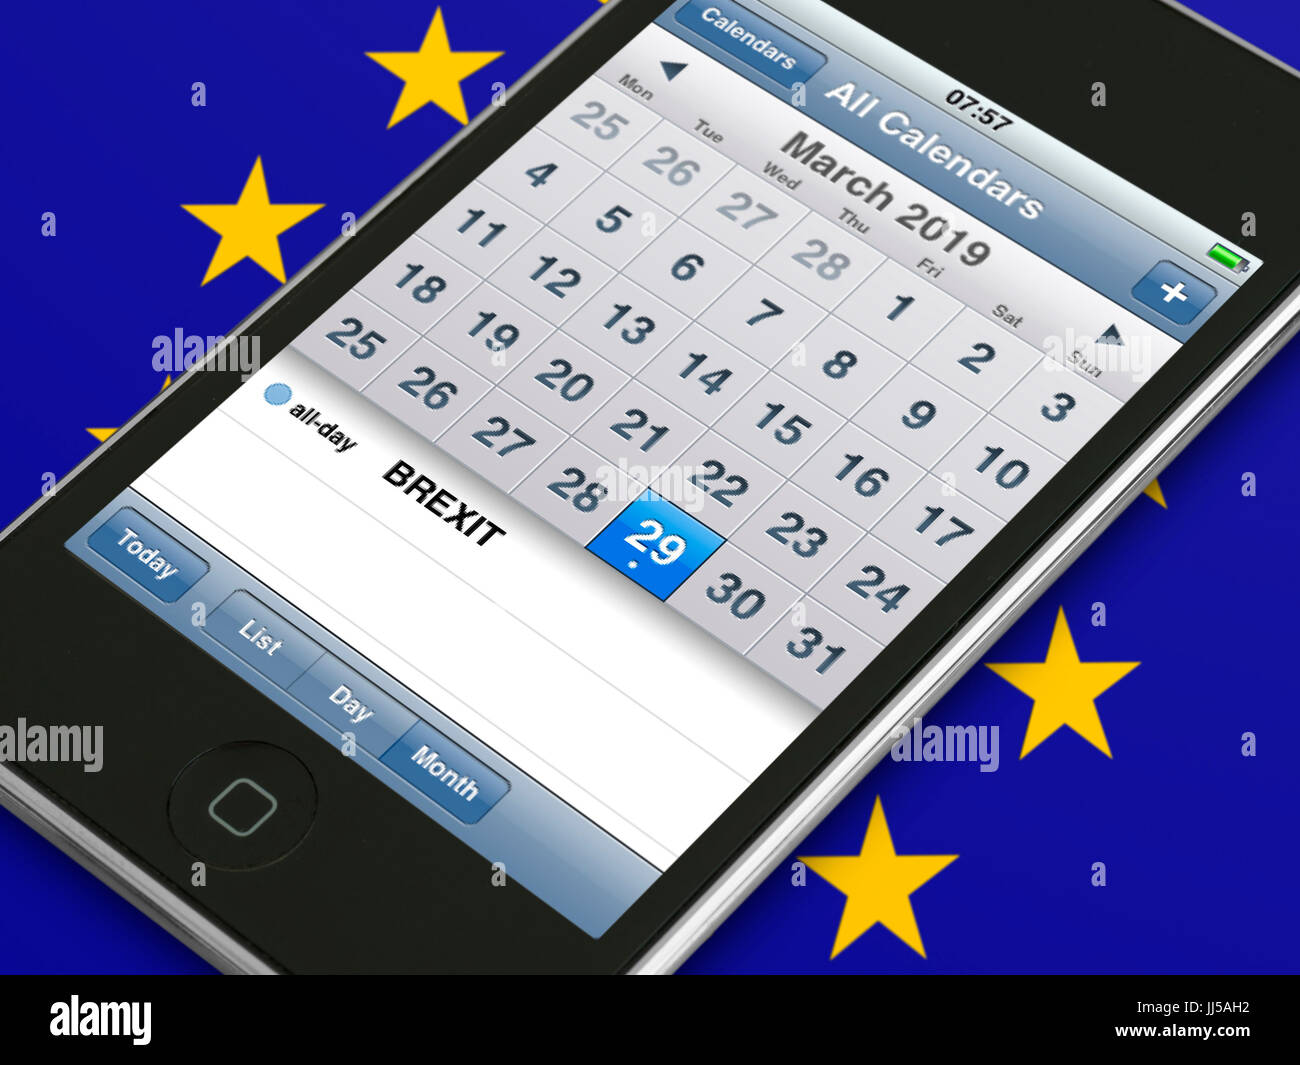 Mobile phone device showing calendar diary event for Brexit date when the UK is due to leave the EU European Union ('Independence day') Stock Photo